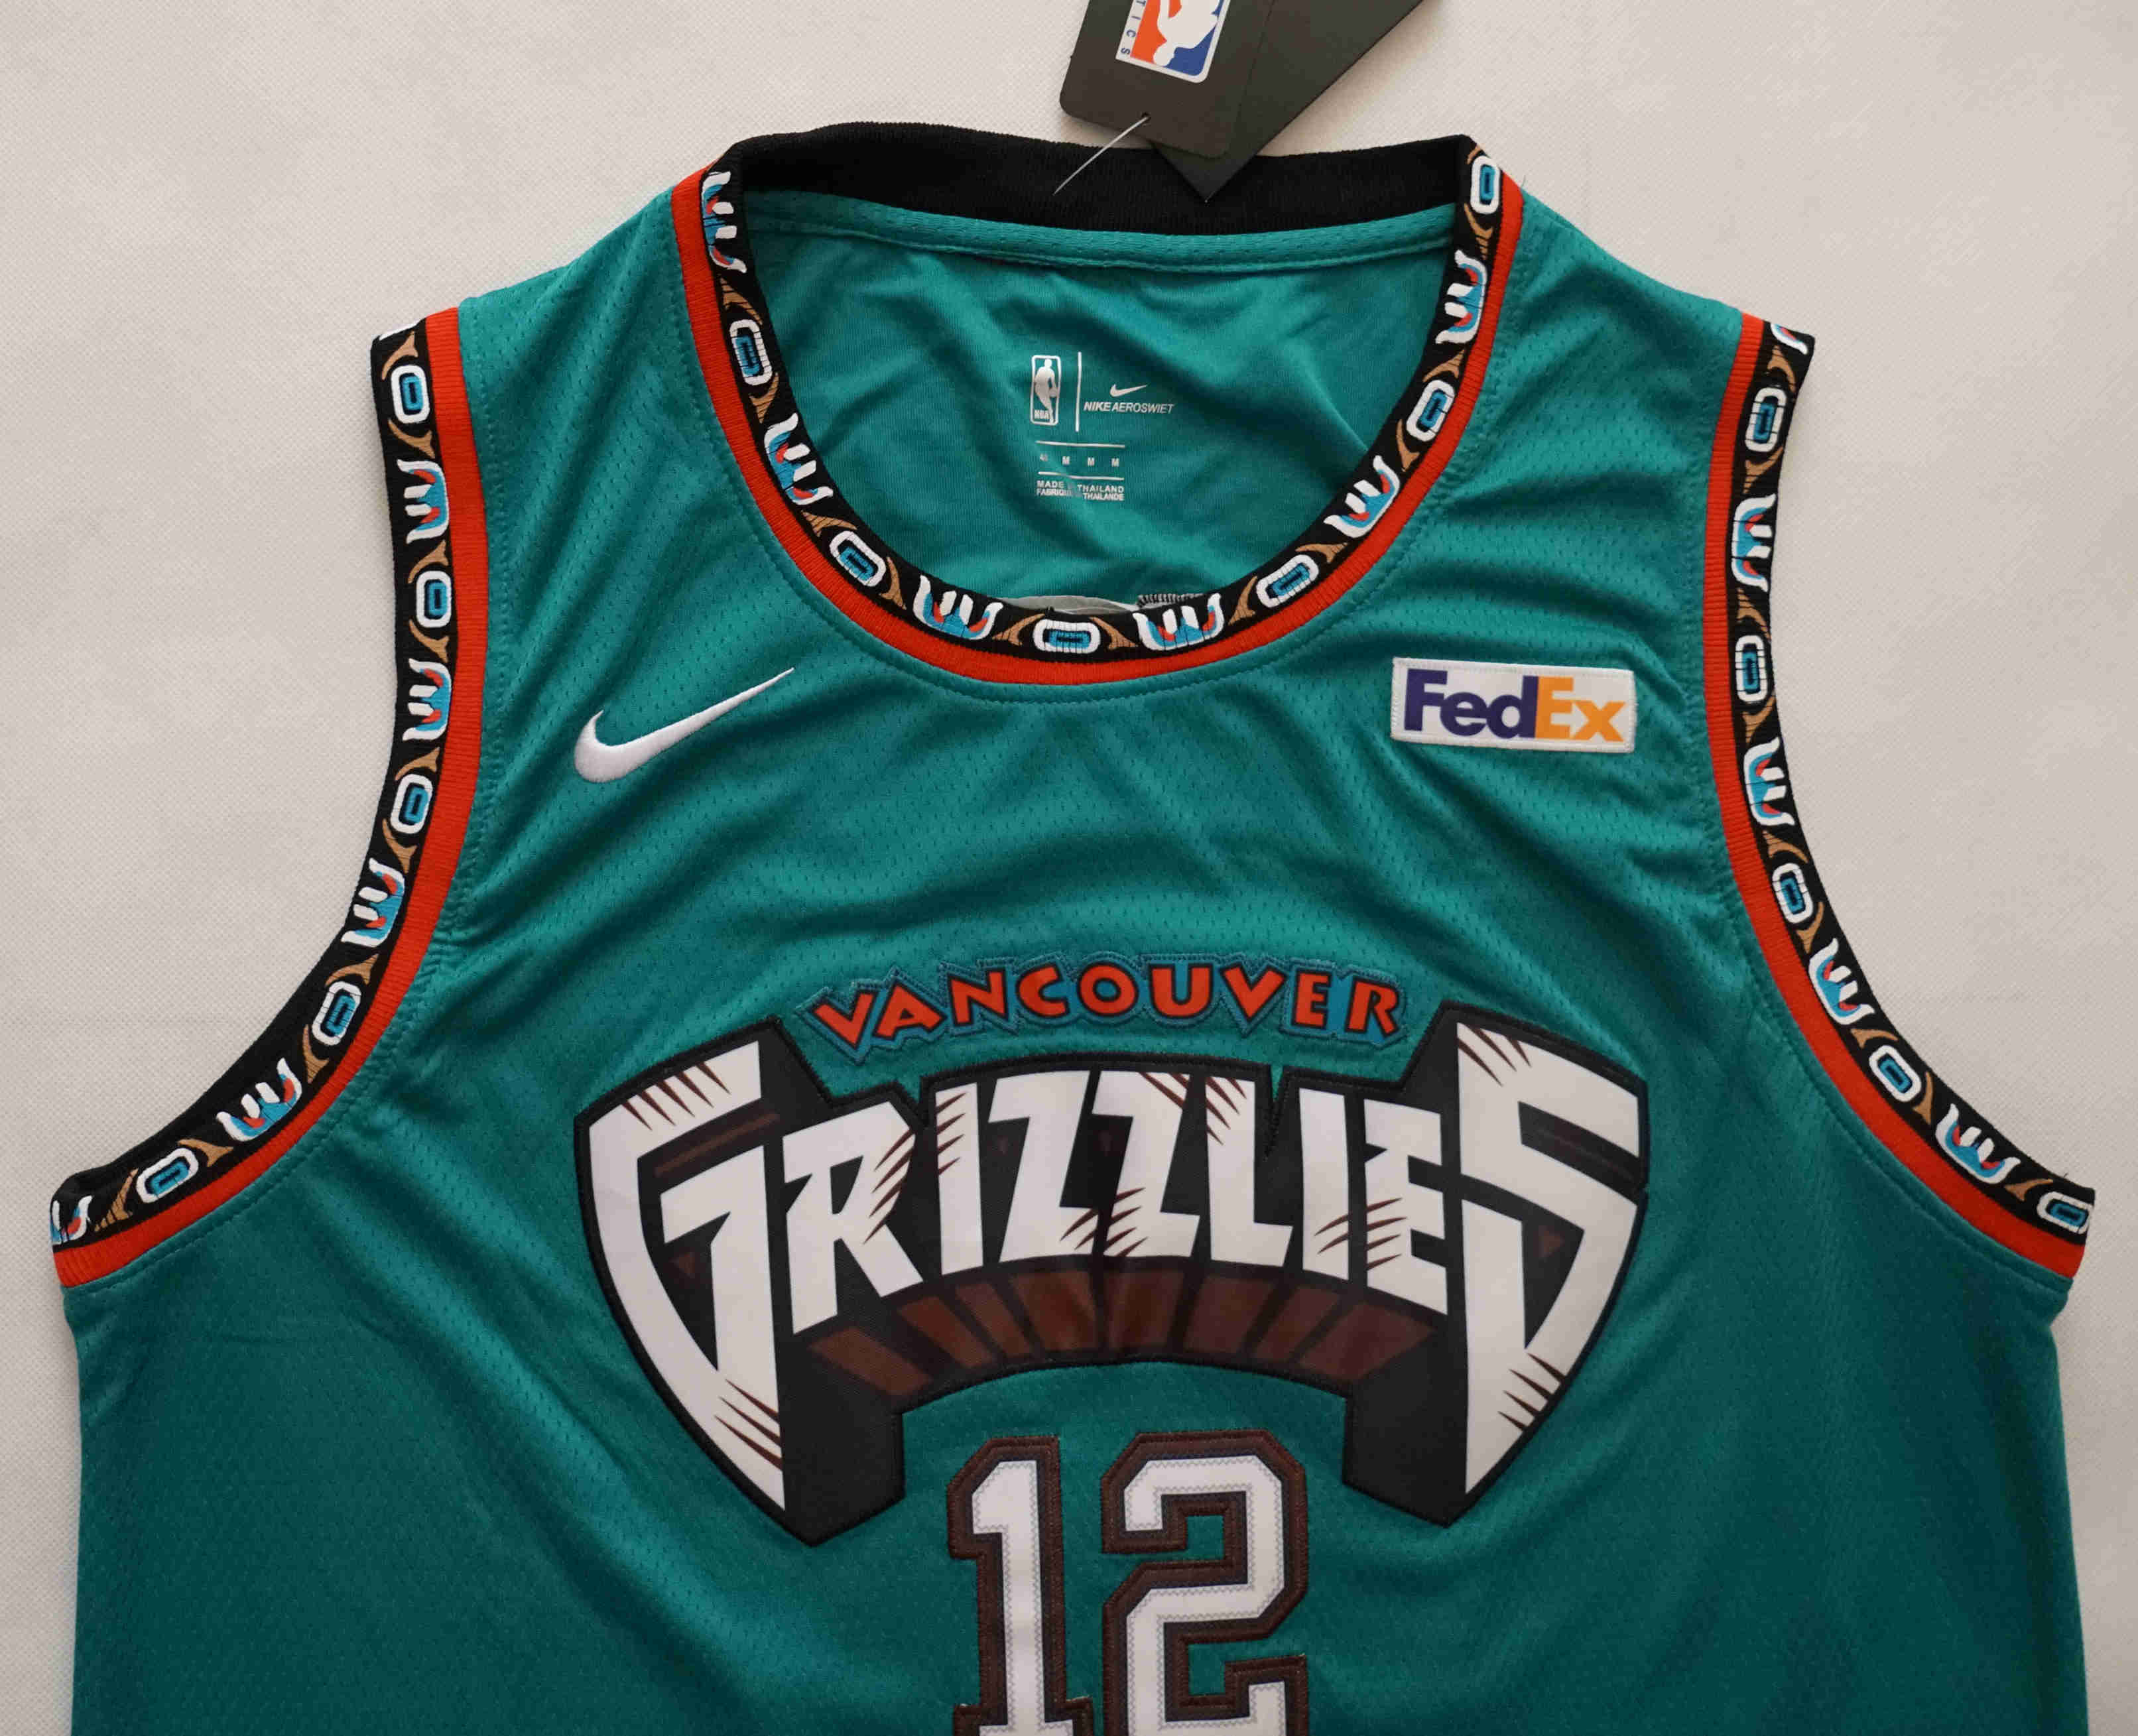 grizzlies throwback jersey